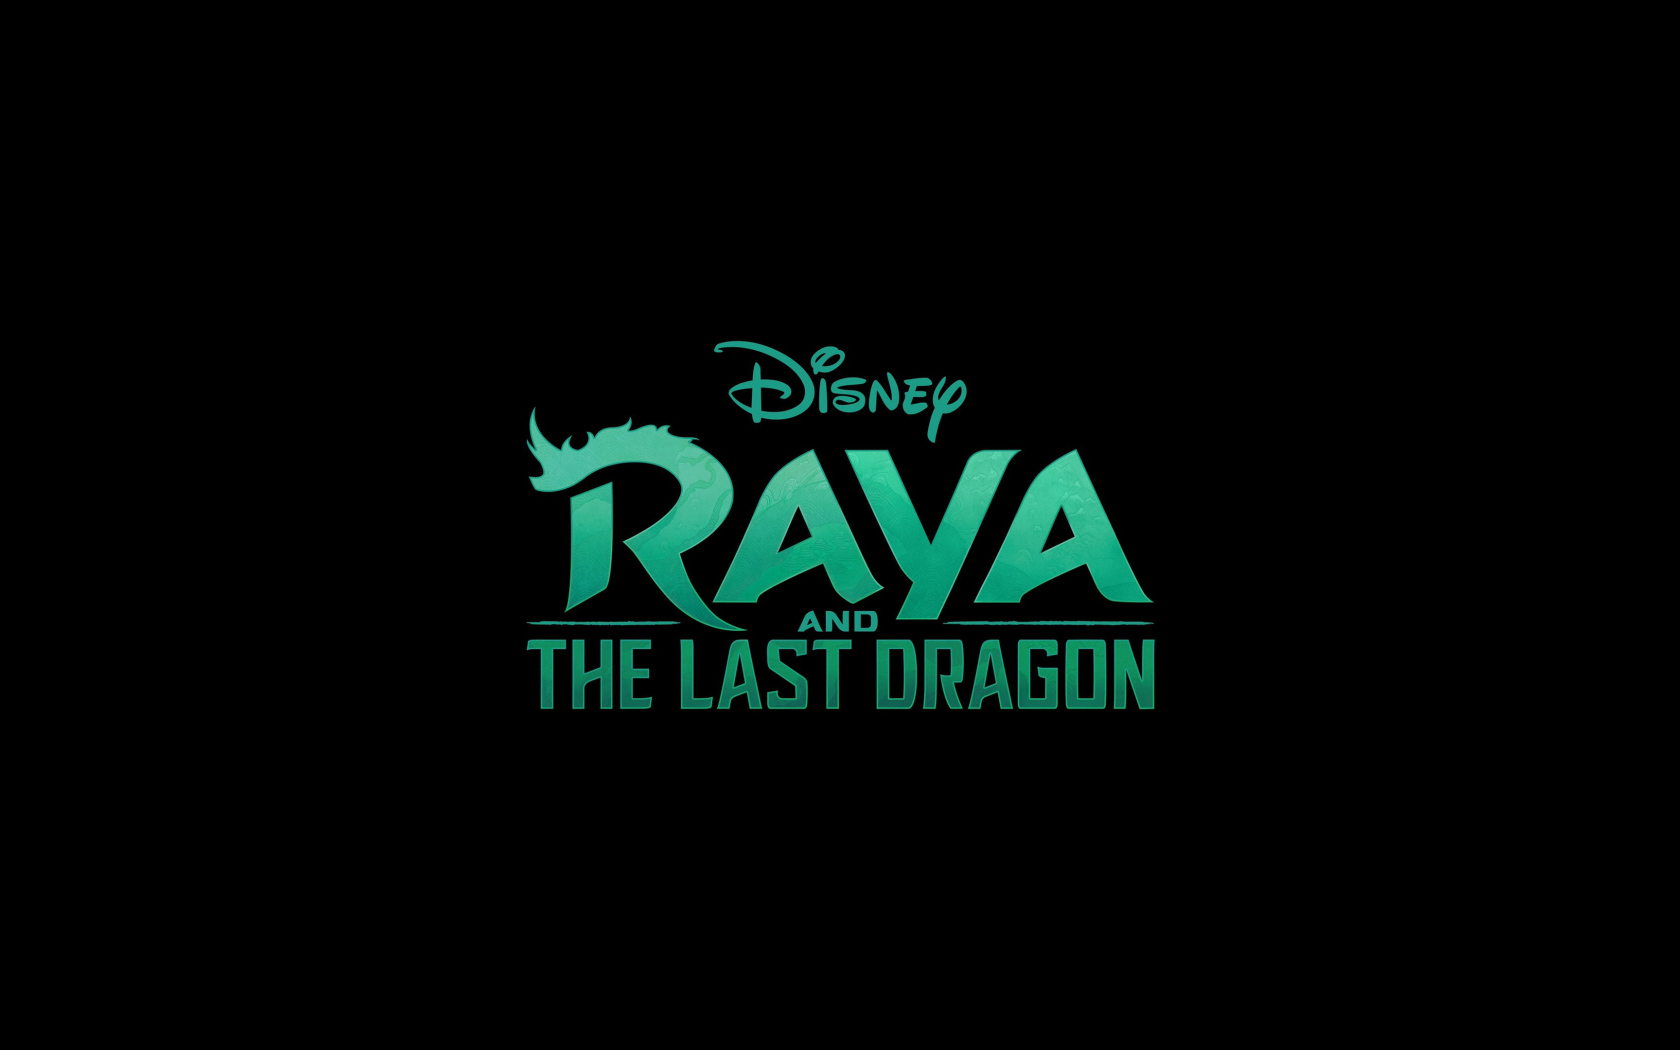 Poster for the new cartoon Reya and the last dragon, 2021